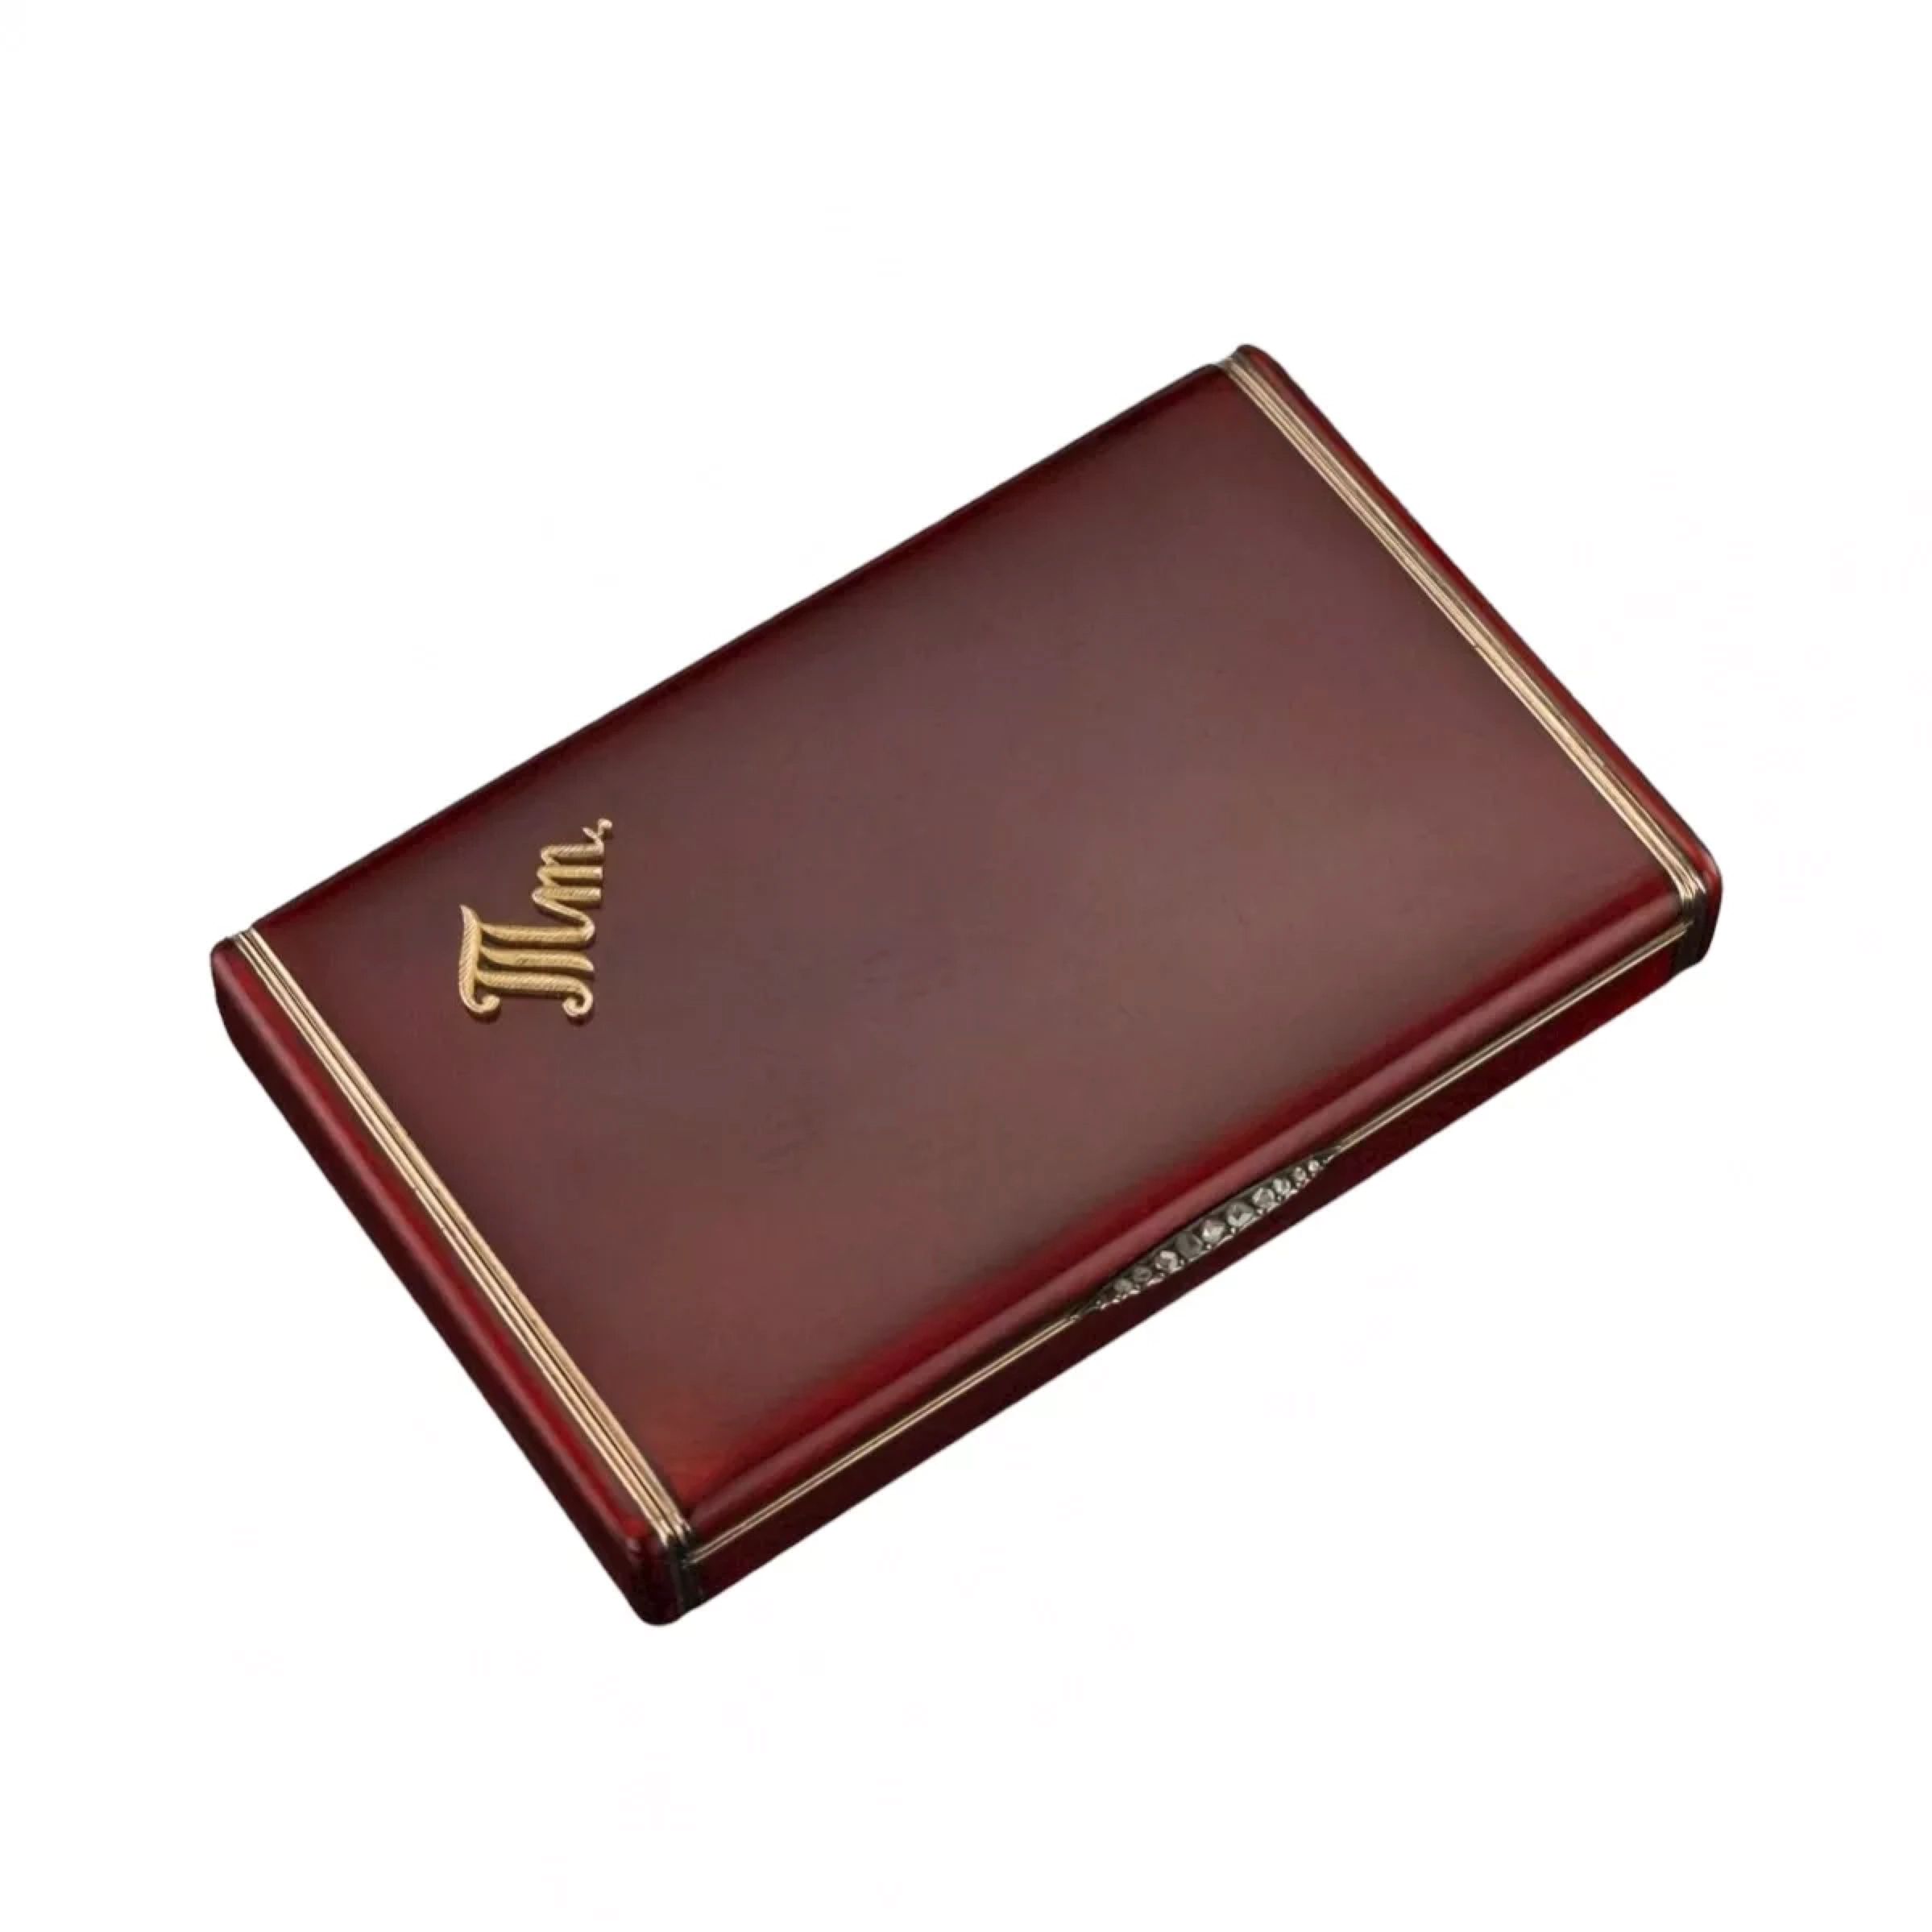 Charming-Russian-made-silver-cigarette-case-made-of-gilded-silver-and-garnet-enamel-